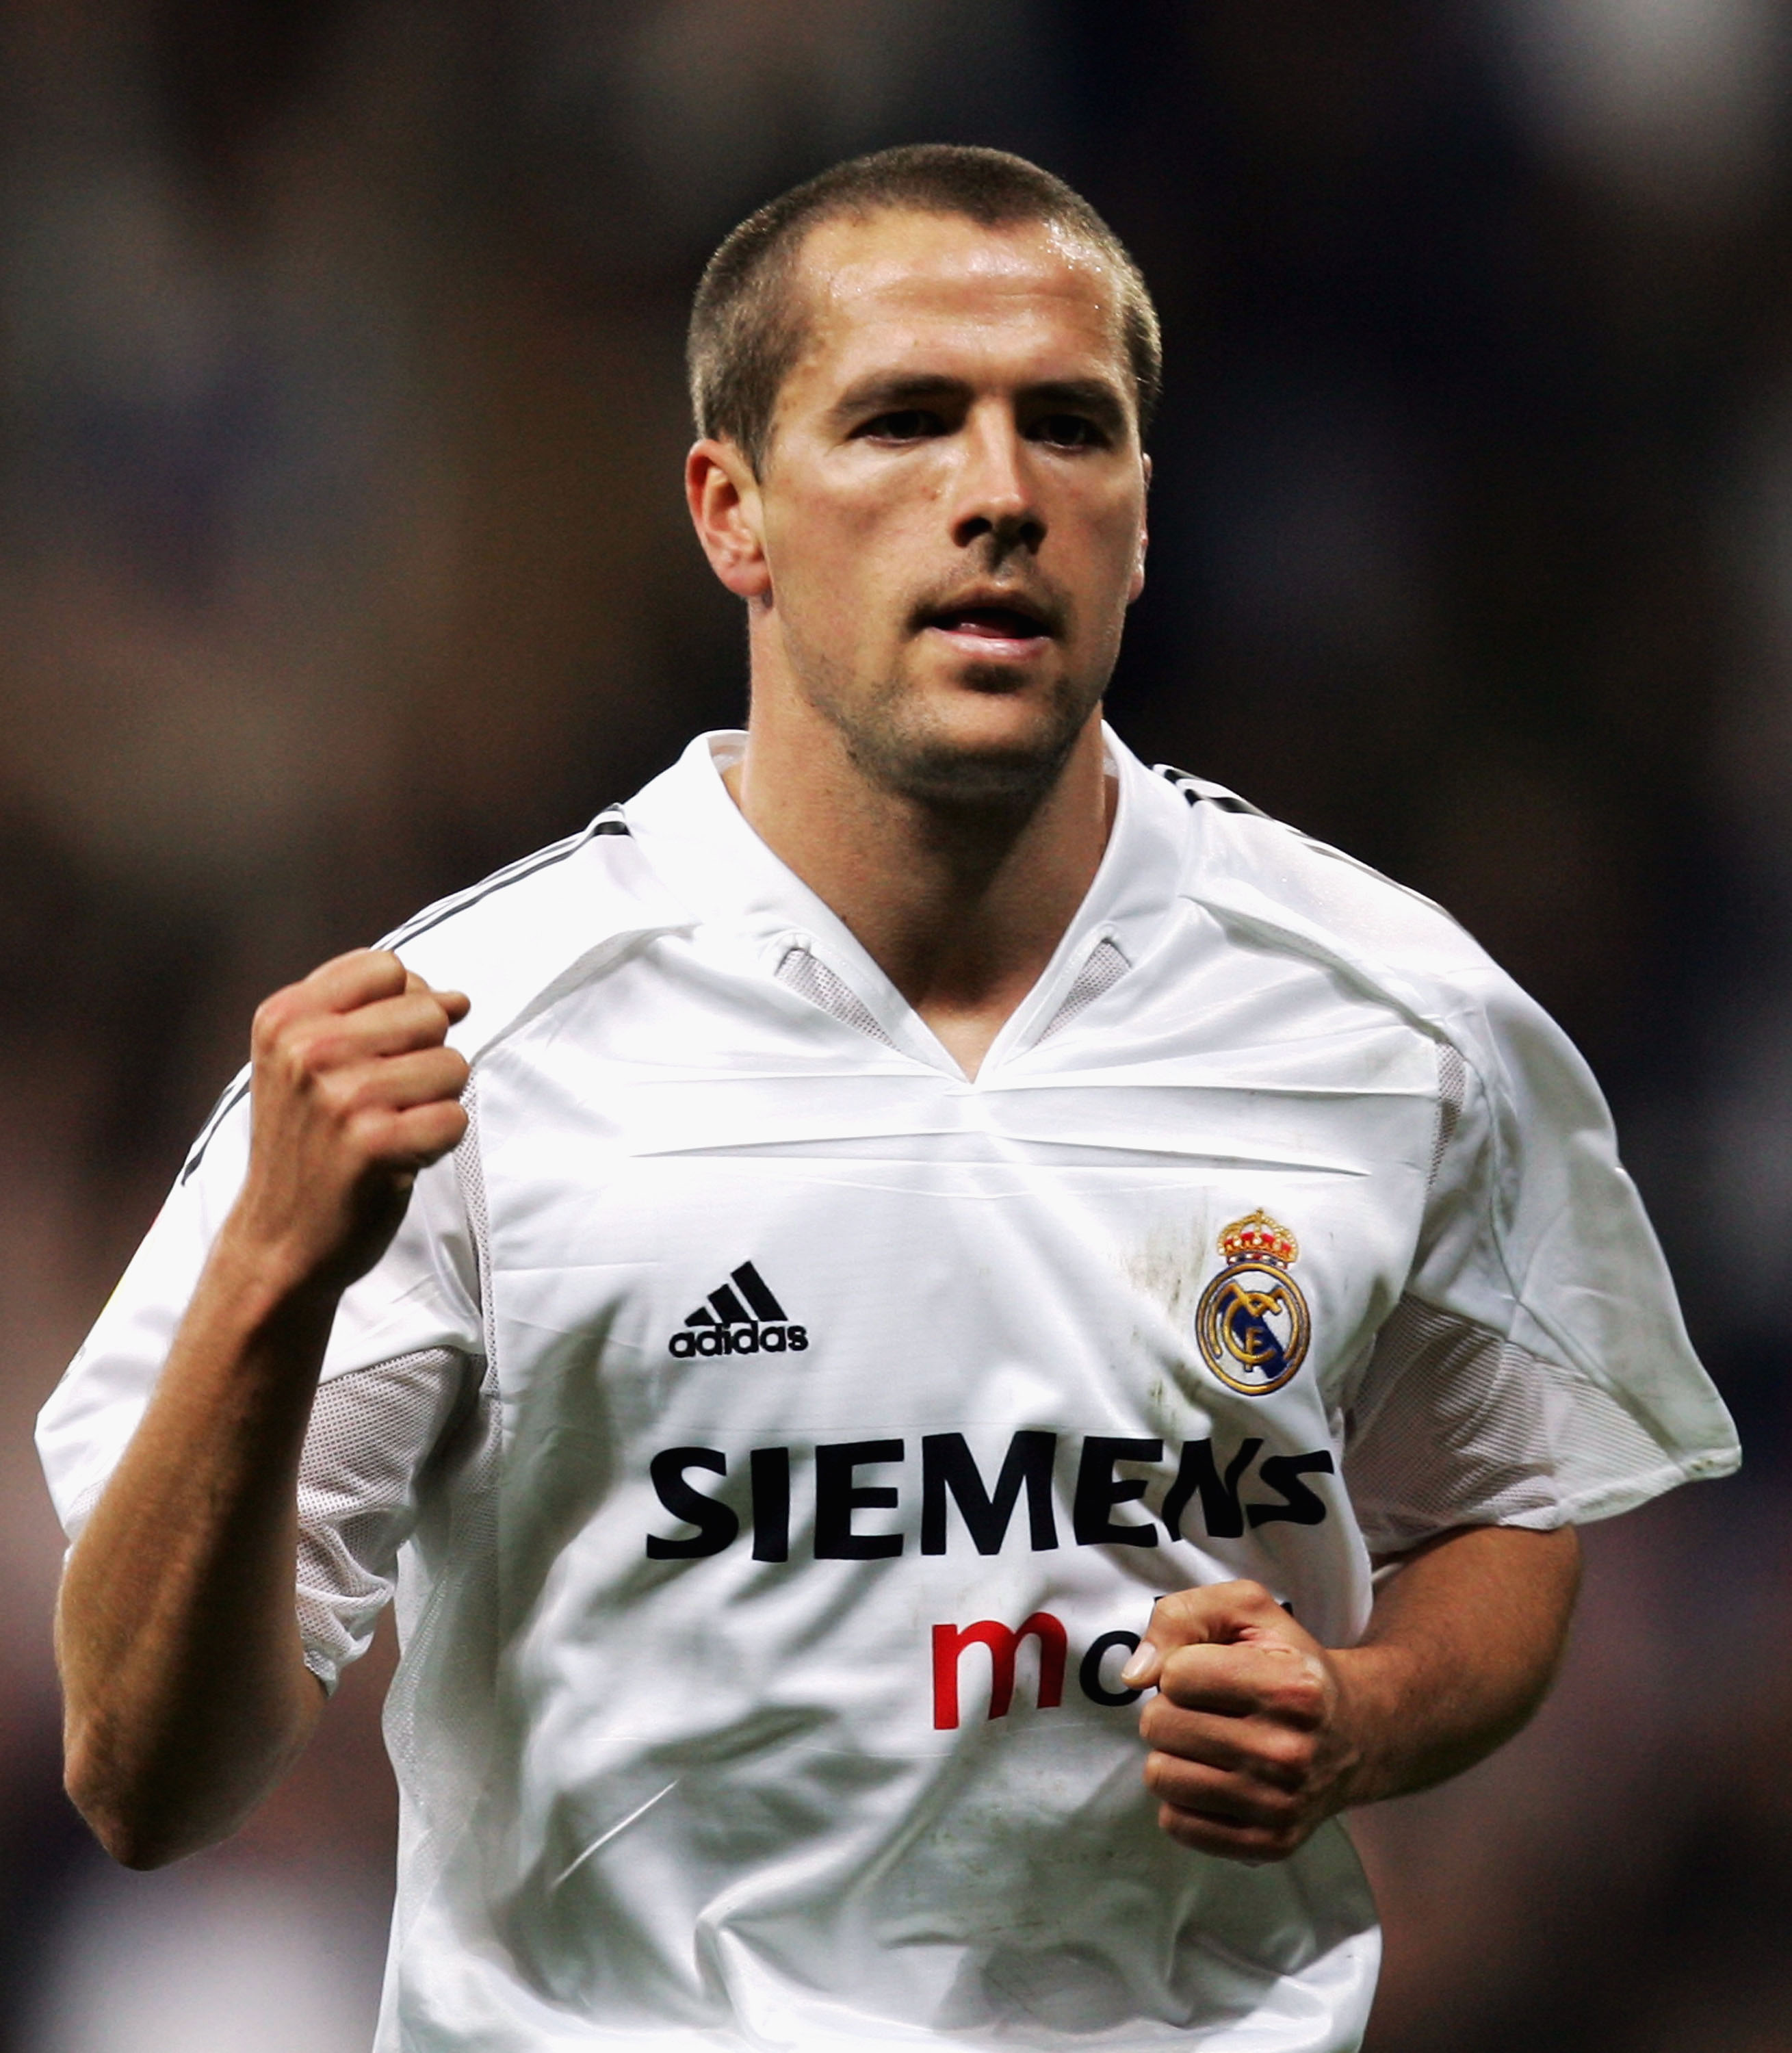 MADRID, SPAIN - JANUARY 19: Real Madrid's Michael Owen celebrates after scoring a goal during a Copa del Rey 3rd round 2nd leg match between Real Madrid and Valladolid at the Bernabeu on January 19, 2005 in Madrid, Spain. (Photo by Denis Doyle/Getty Image